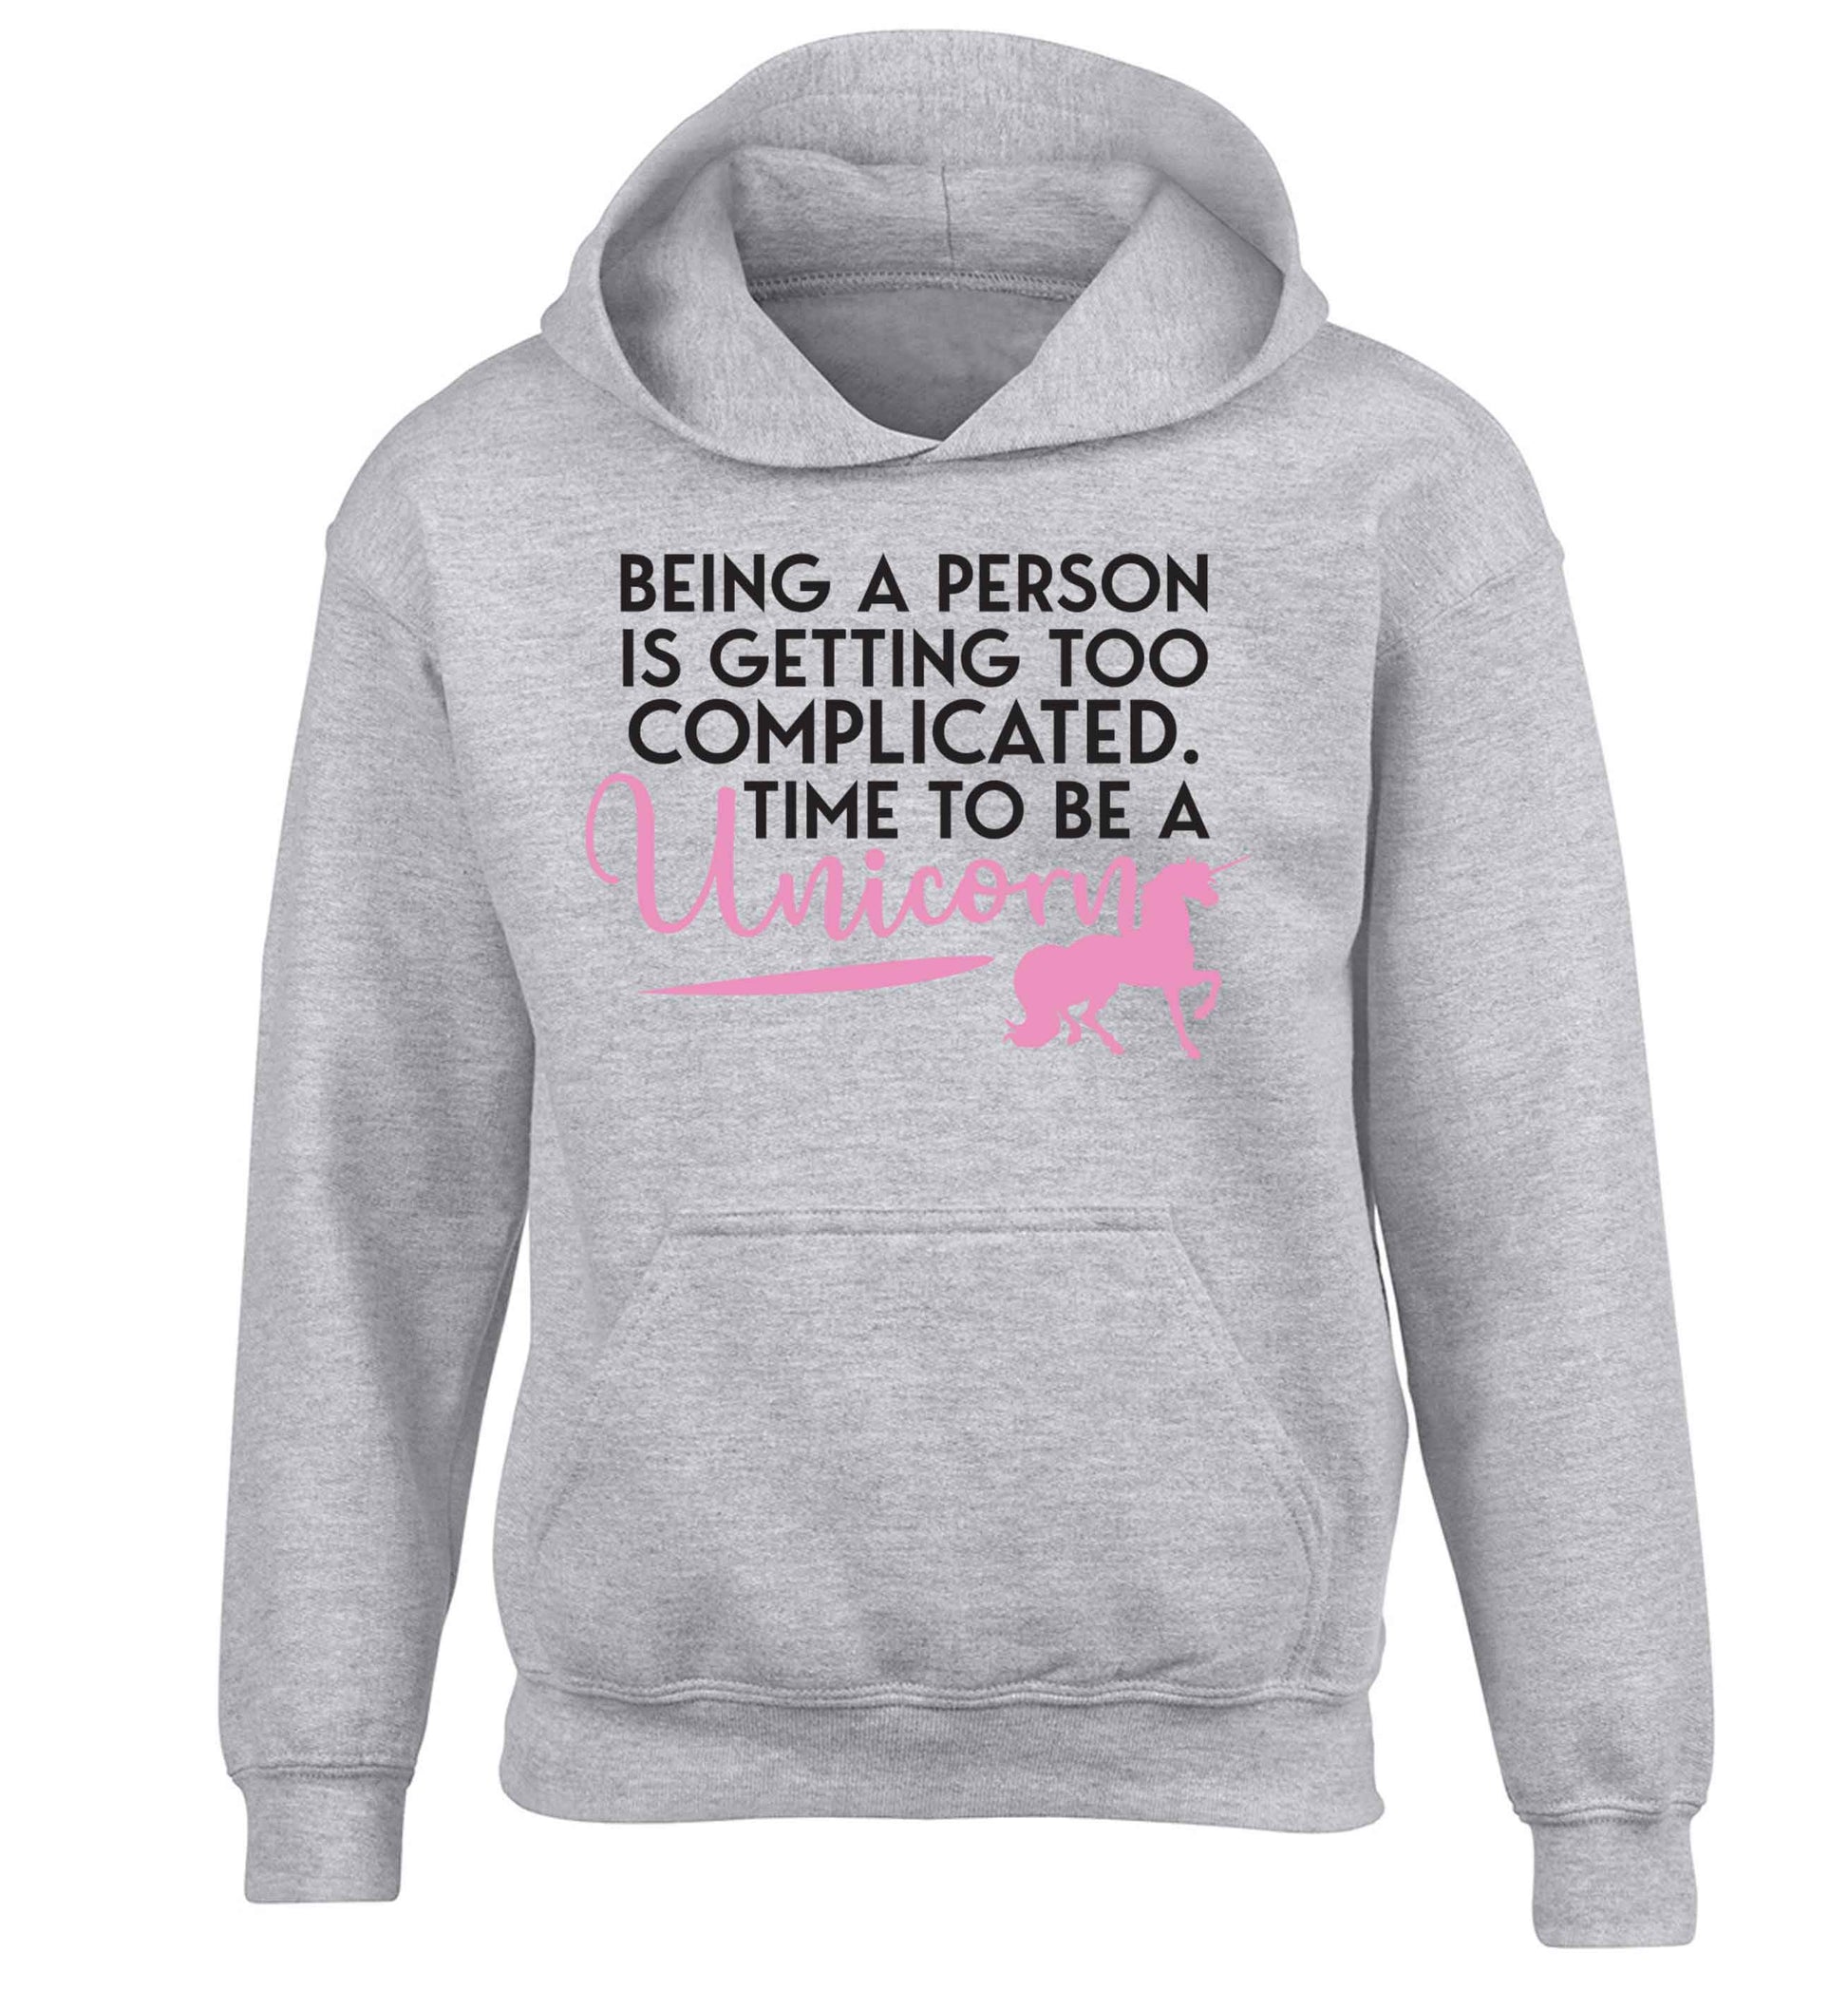 Being a person is getting too complicated time to be a unicorn children's grey hoodie 12-13 Years